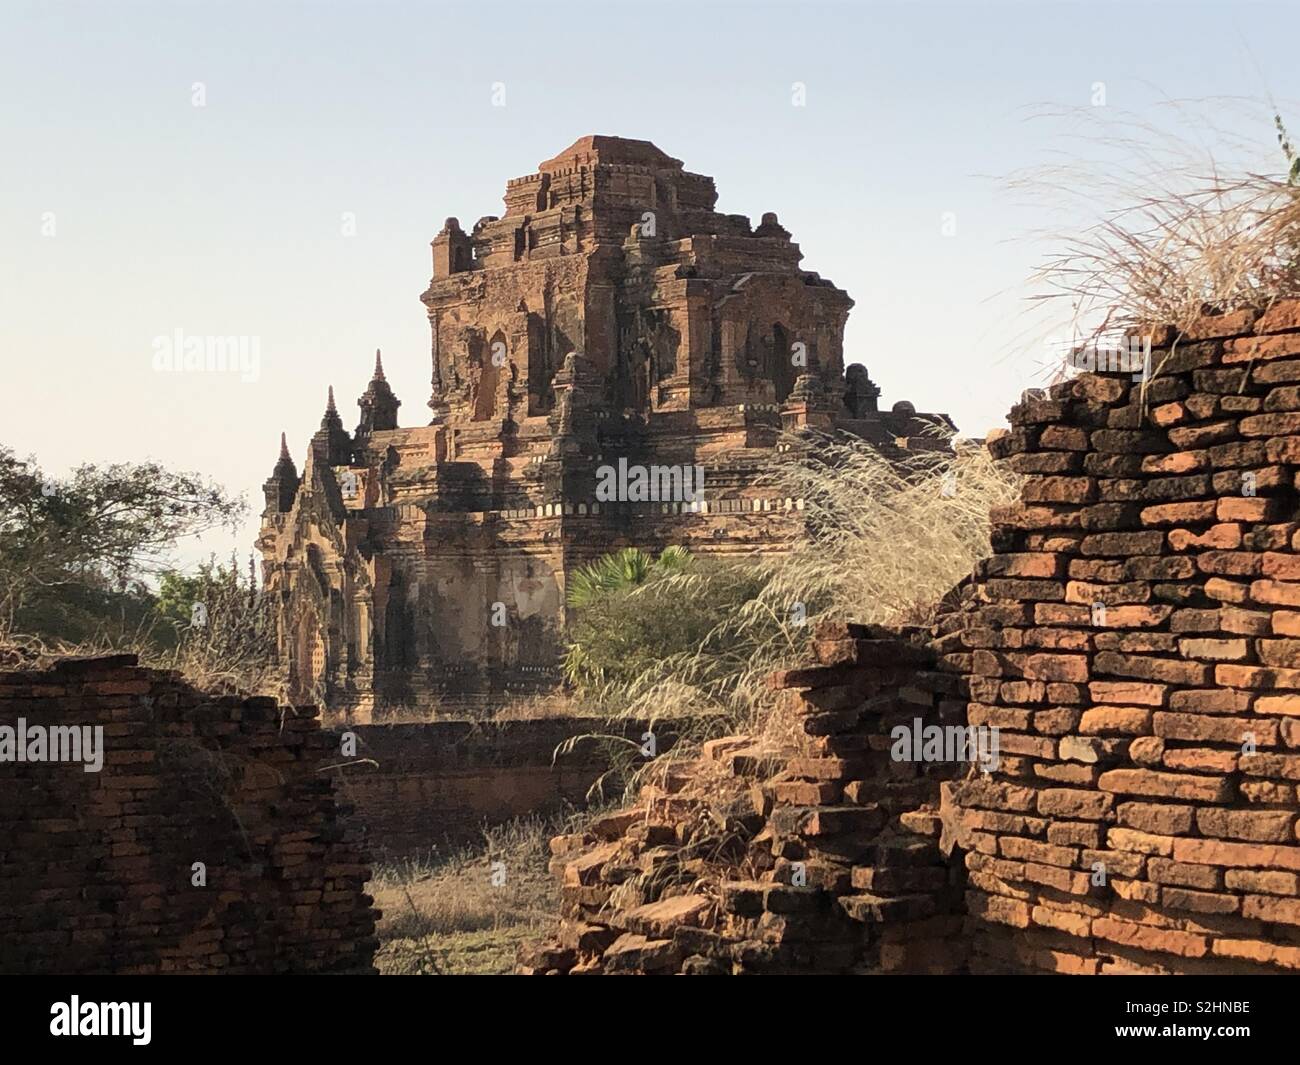 Ancient, forsaken and abandoned Buddhist temple in Bagan, Myanmar, Burma. Surrounded by a wall made of bricks Stock Photo